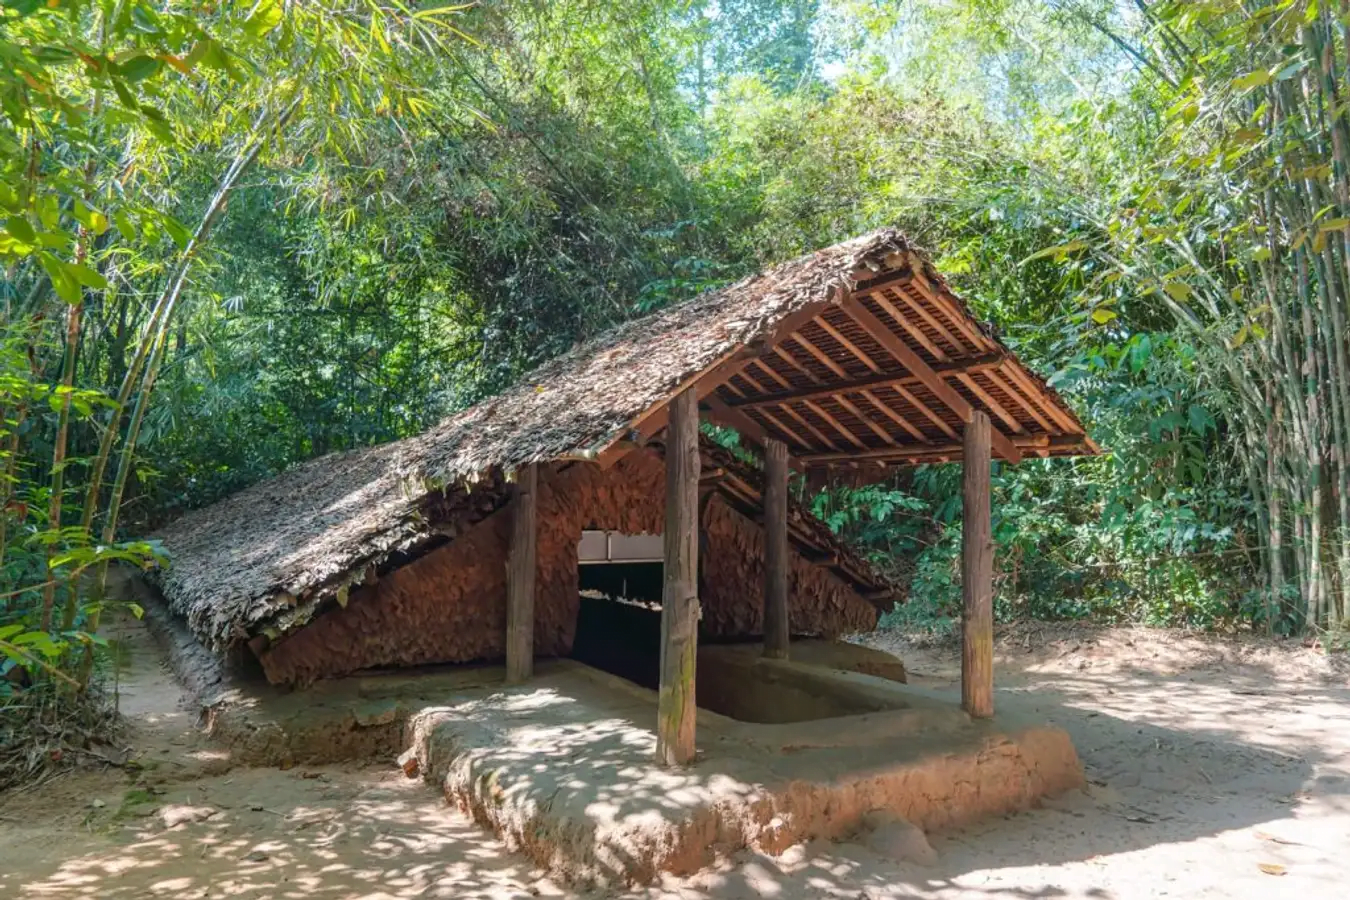 The entrance of Cu Chi tunnels